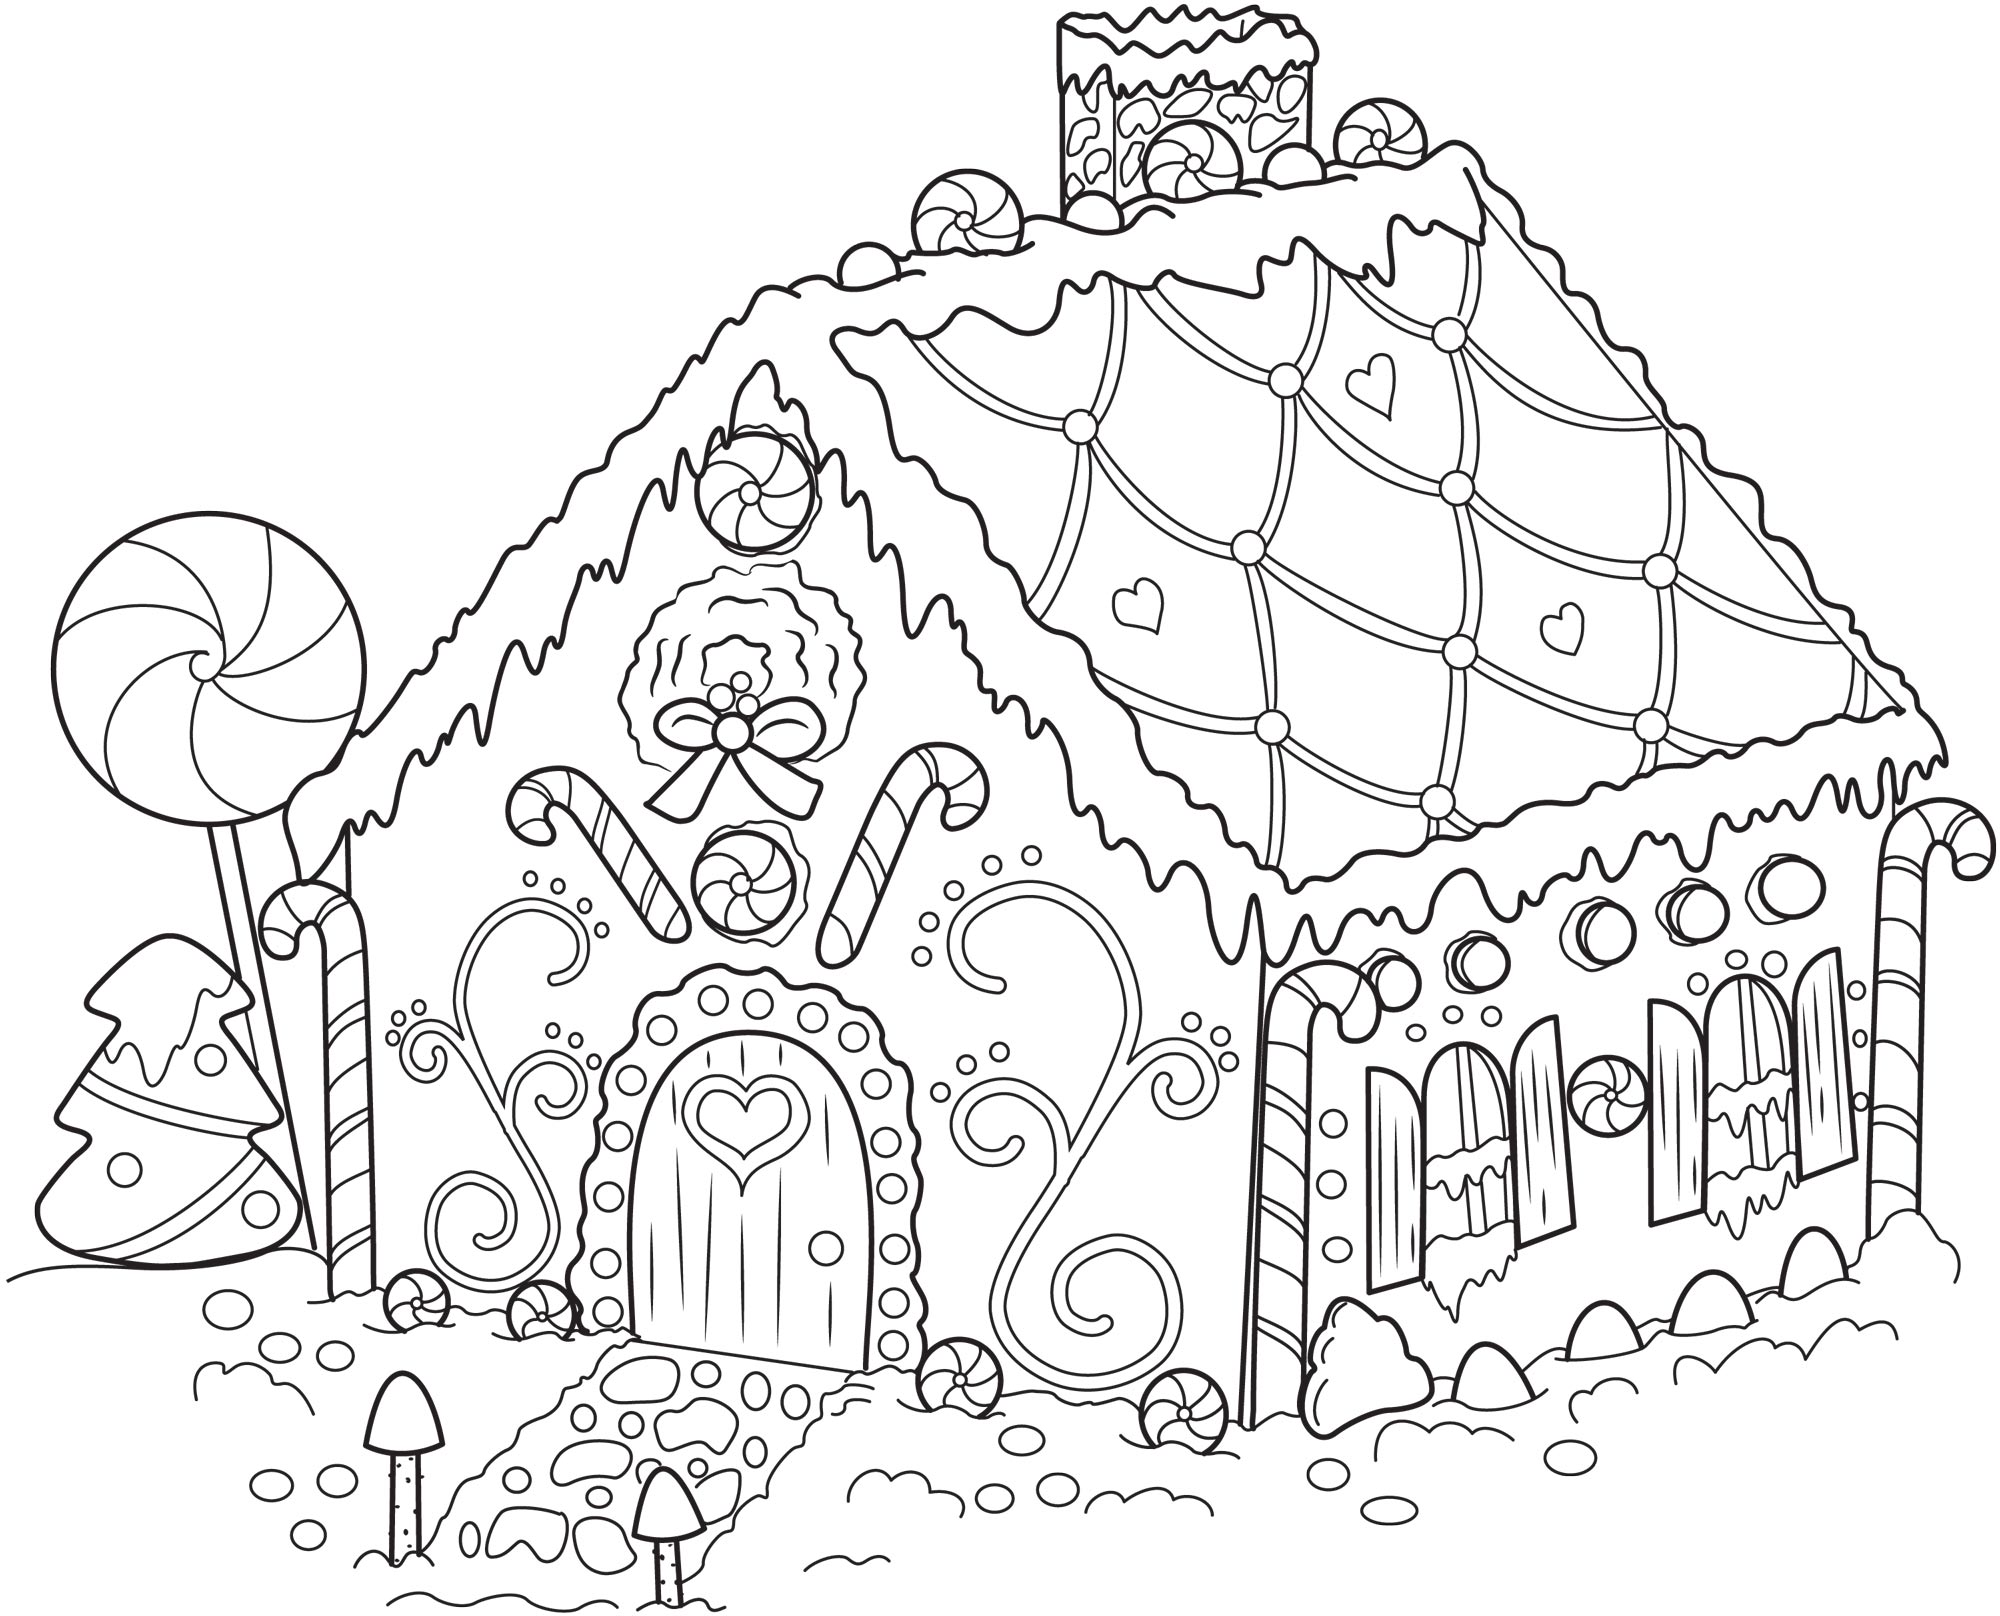 Gingerbread Man Coloring Page (17 Pictures) - Colorine.net | 4769